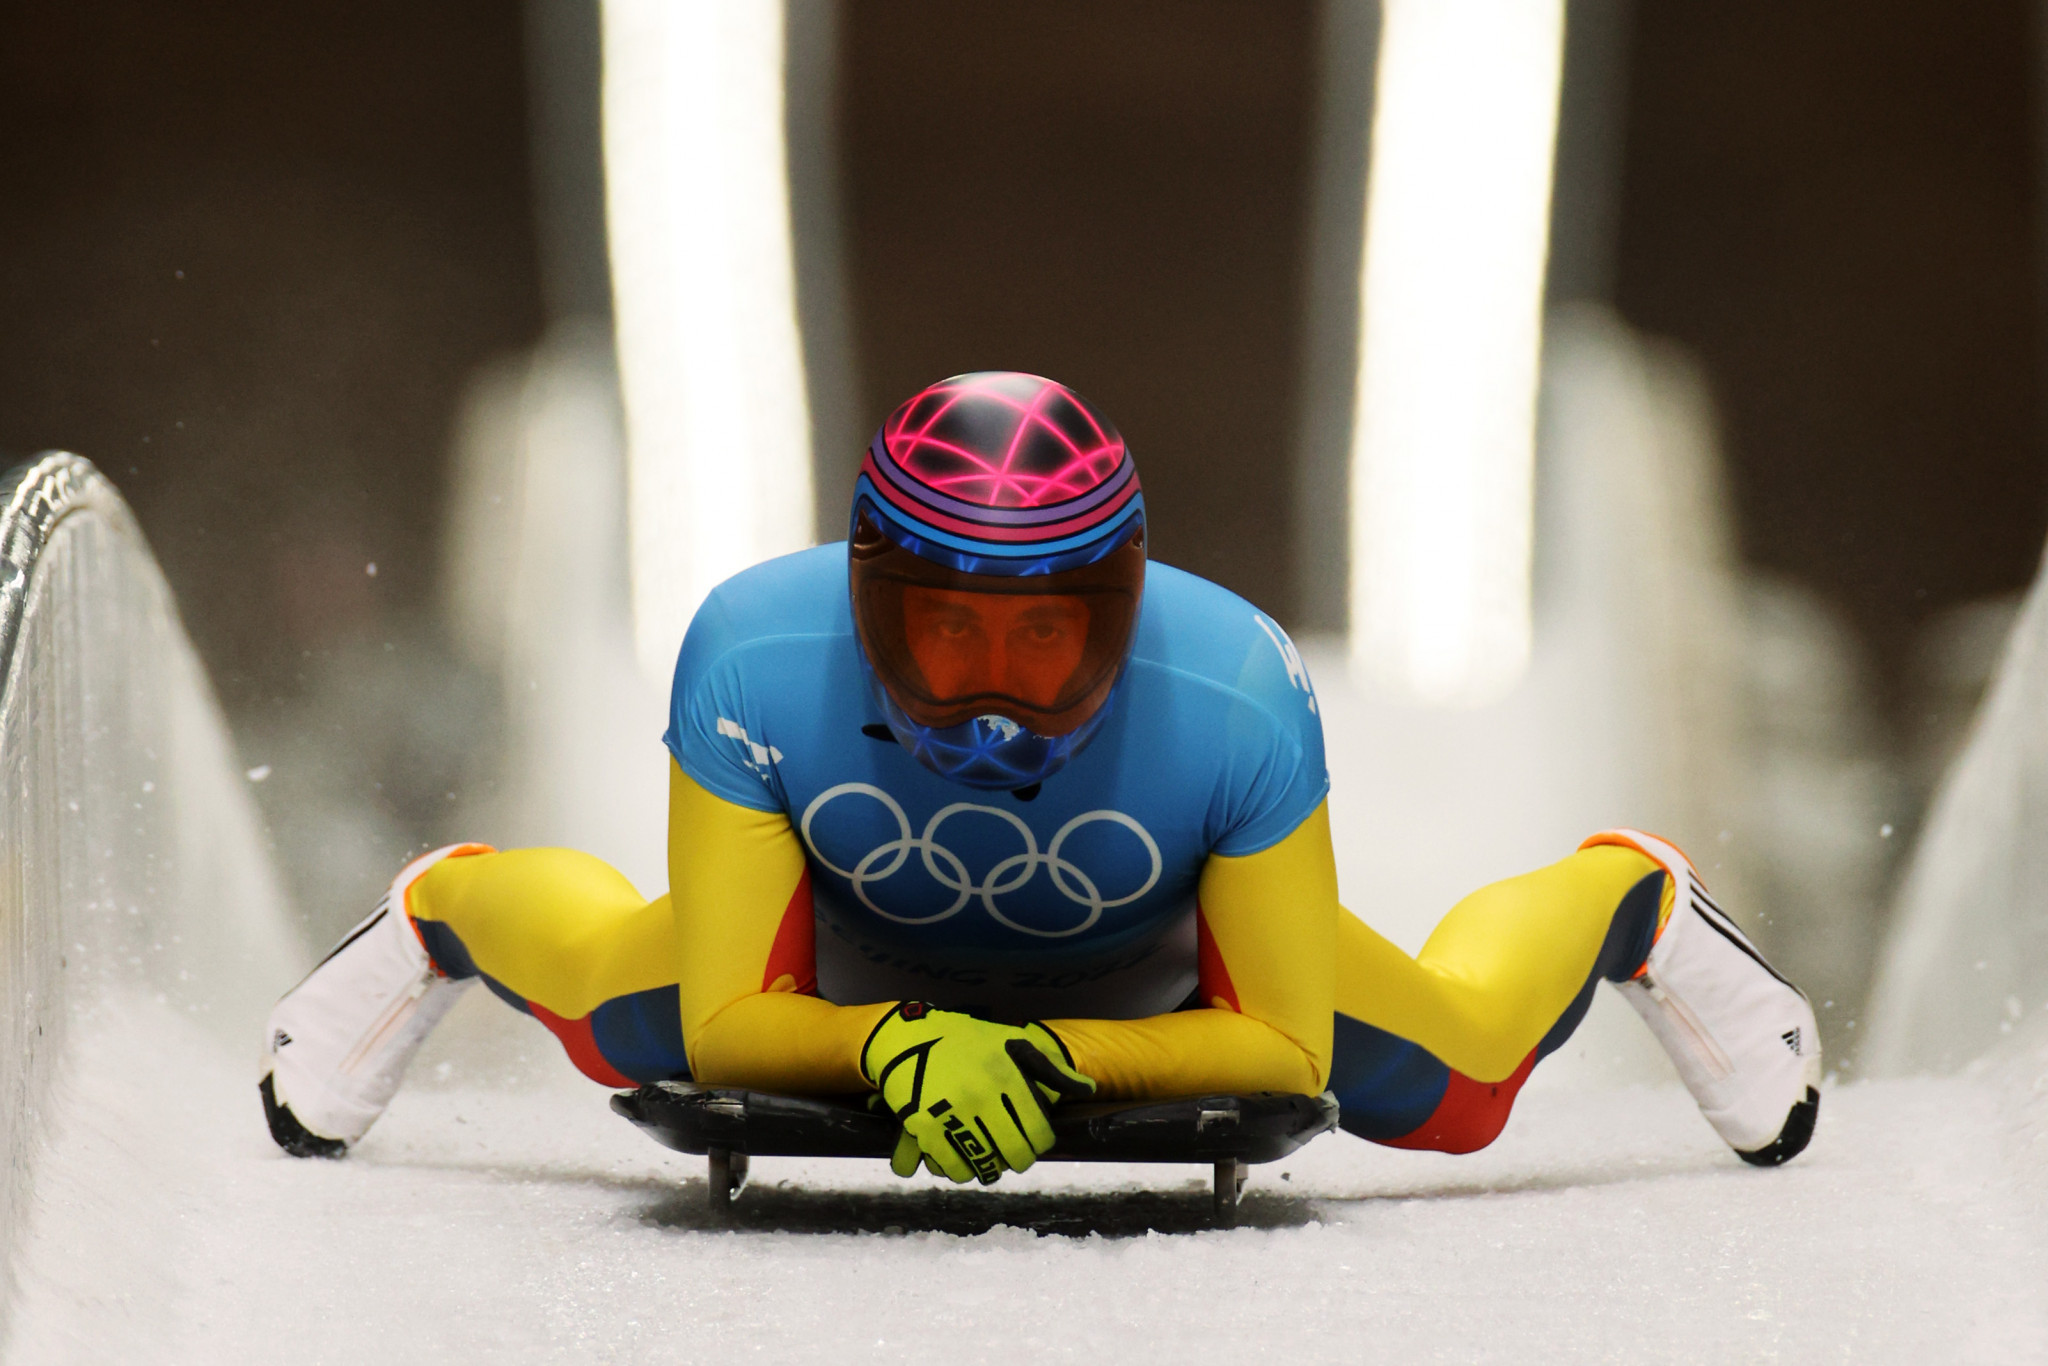 The Royal Spanish Ice Sports Federation is looking to recruit new athletes for its skeleton team ©Getty Images